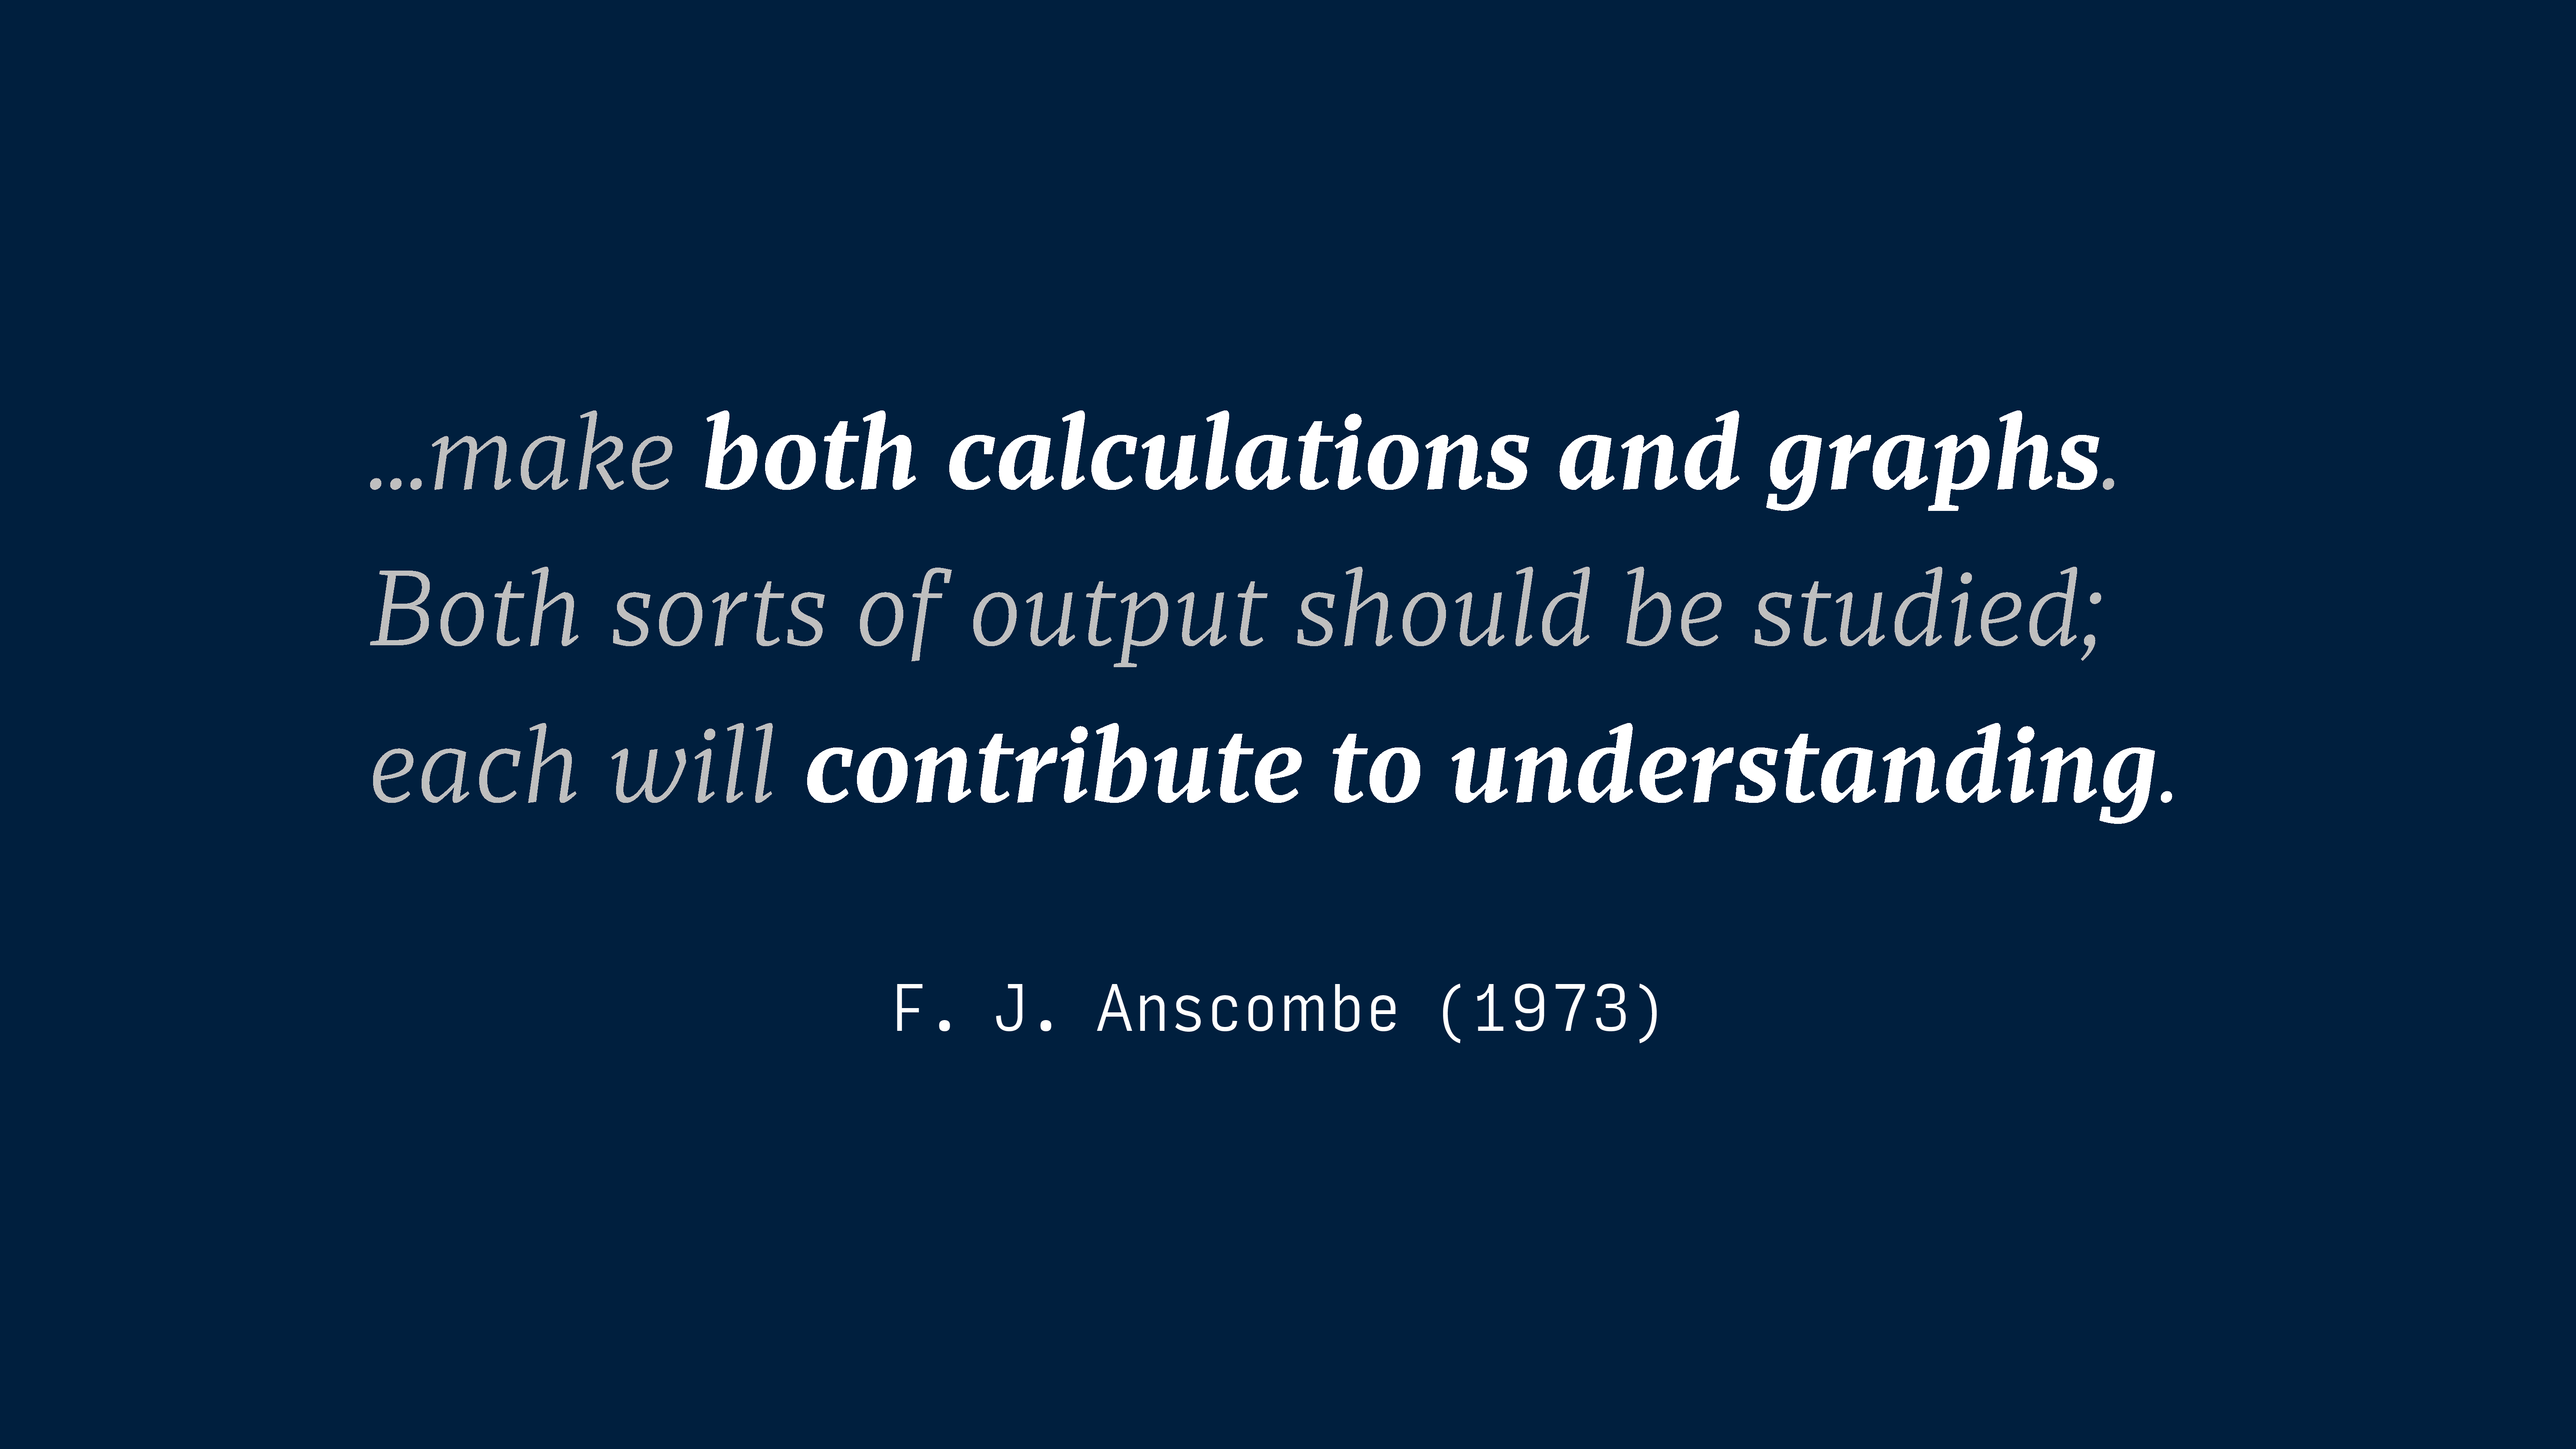 Quote by F.J. Anscombe